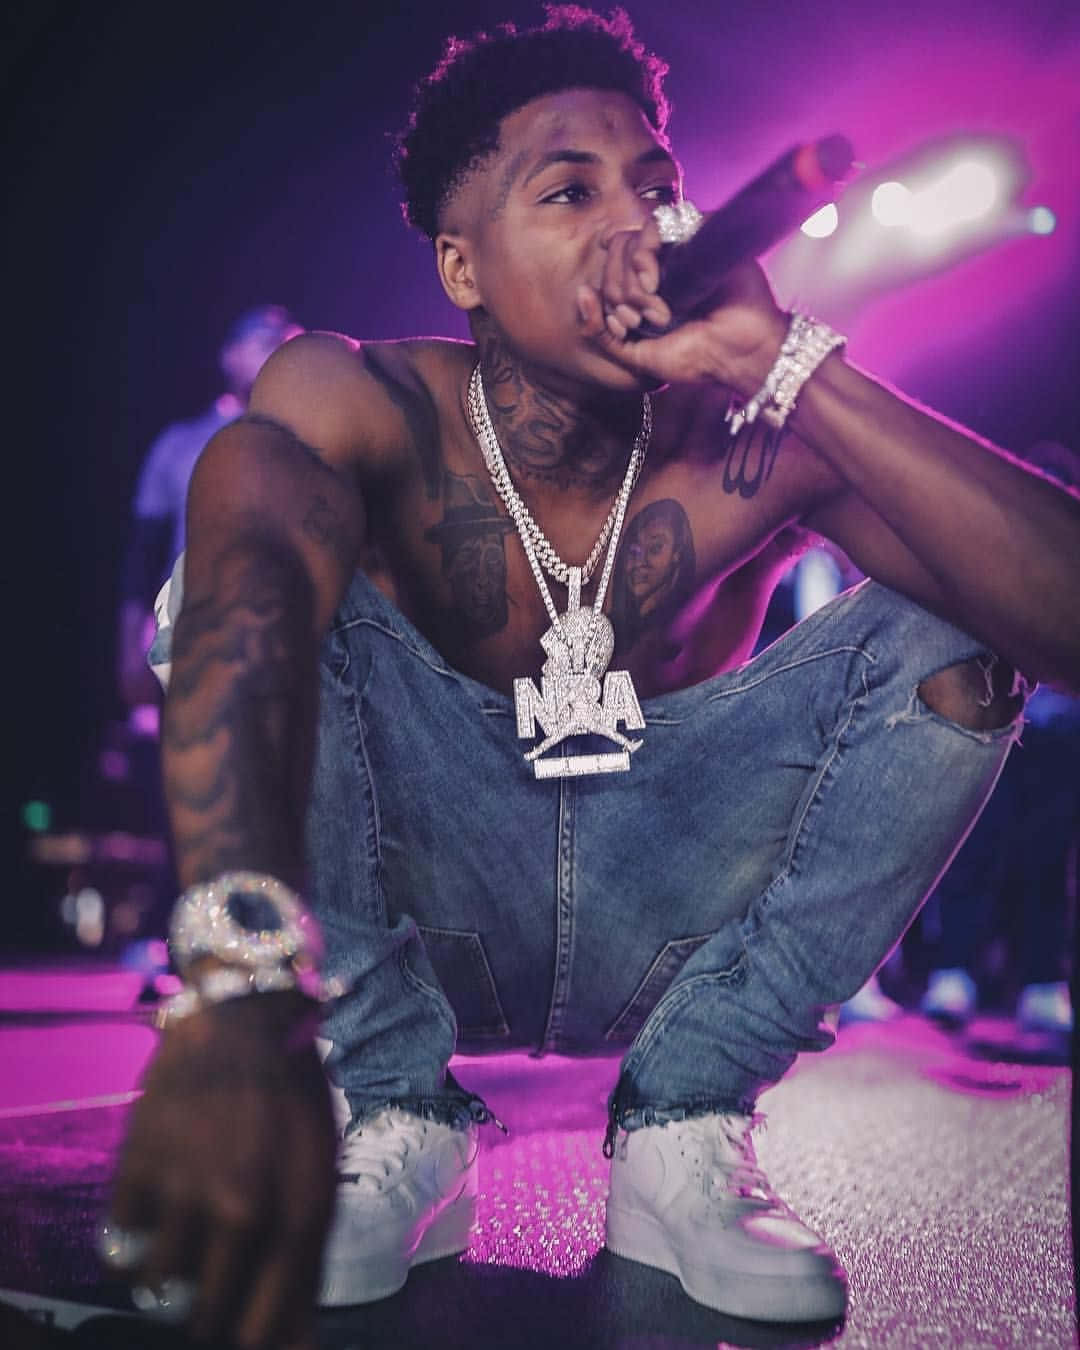 Download Youngboy Never Broke Again Performance On Stage Wallpaper   Wallpaperscom